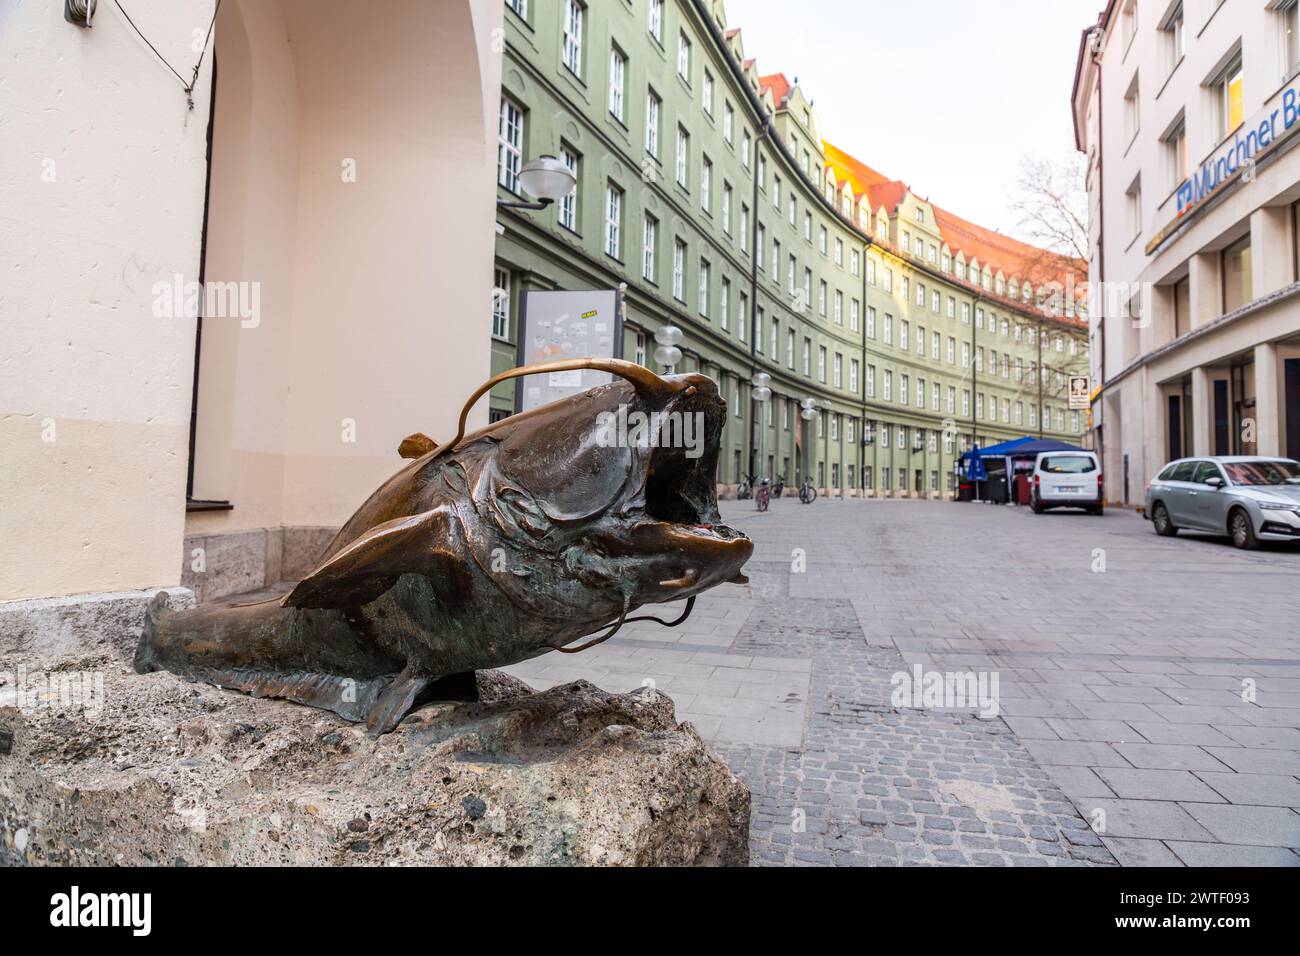 Munich, Germany - DEC 23, 2021: Wallers sculpture in front of the Fishery and Hunting Museum in Marienplatz, Munich, Germany. Replica of the Porcellin Stock Photo